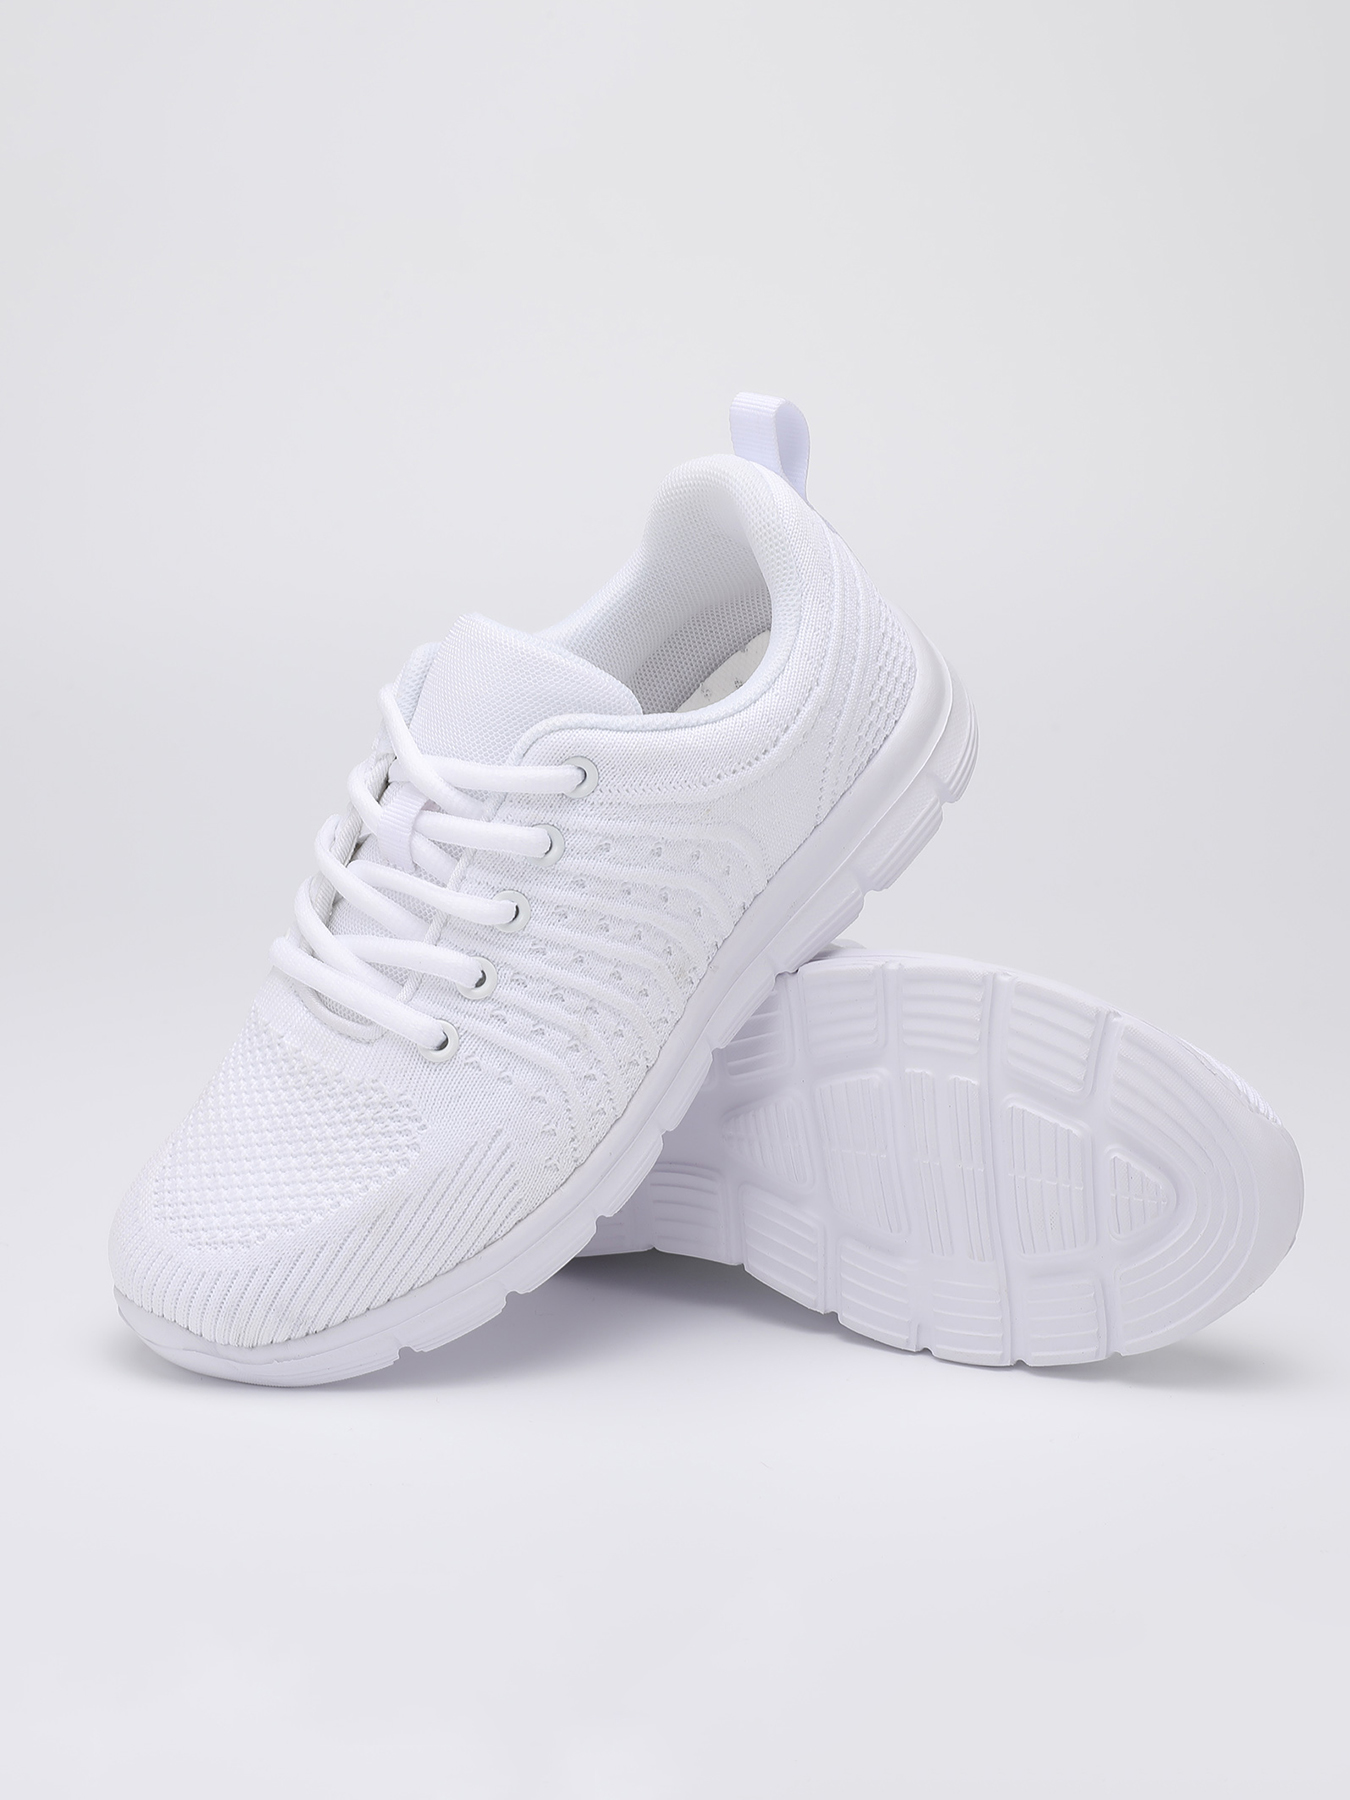 Womens Running Shoes Tennis Shoes Walking Sneakers Water Sports Shoes ...